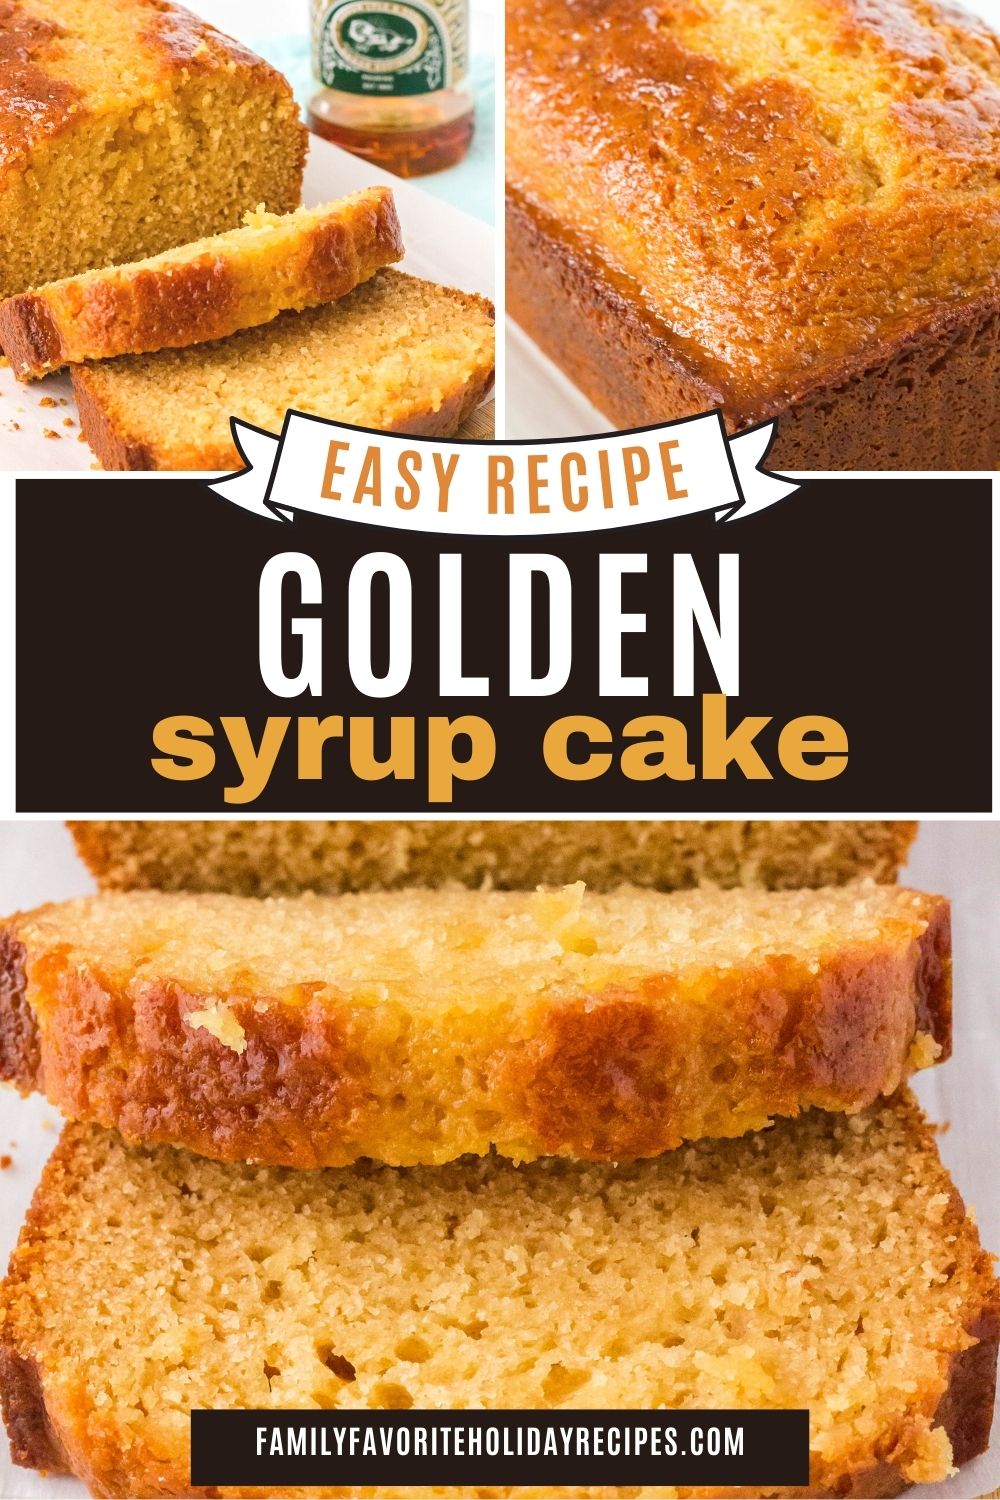 three images showing a golden syrup loaf cake, both sliced and unsliced